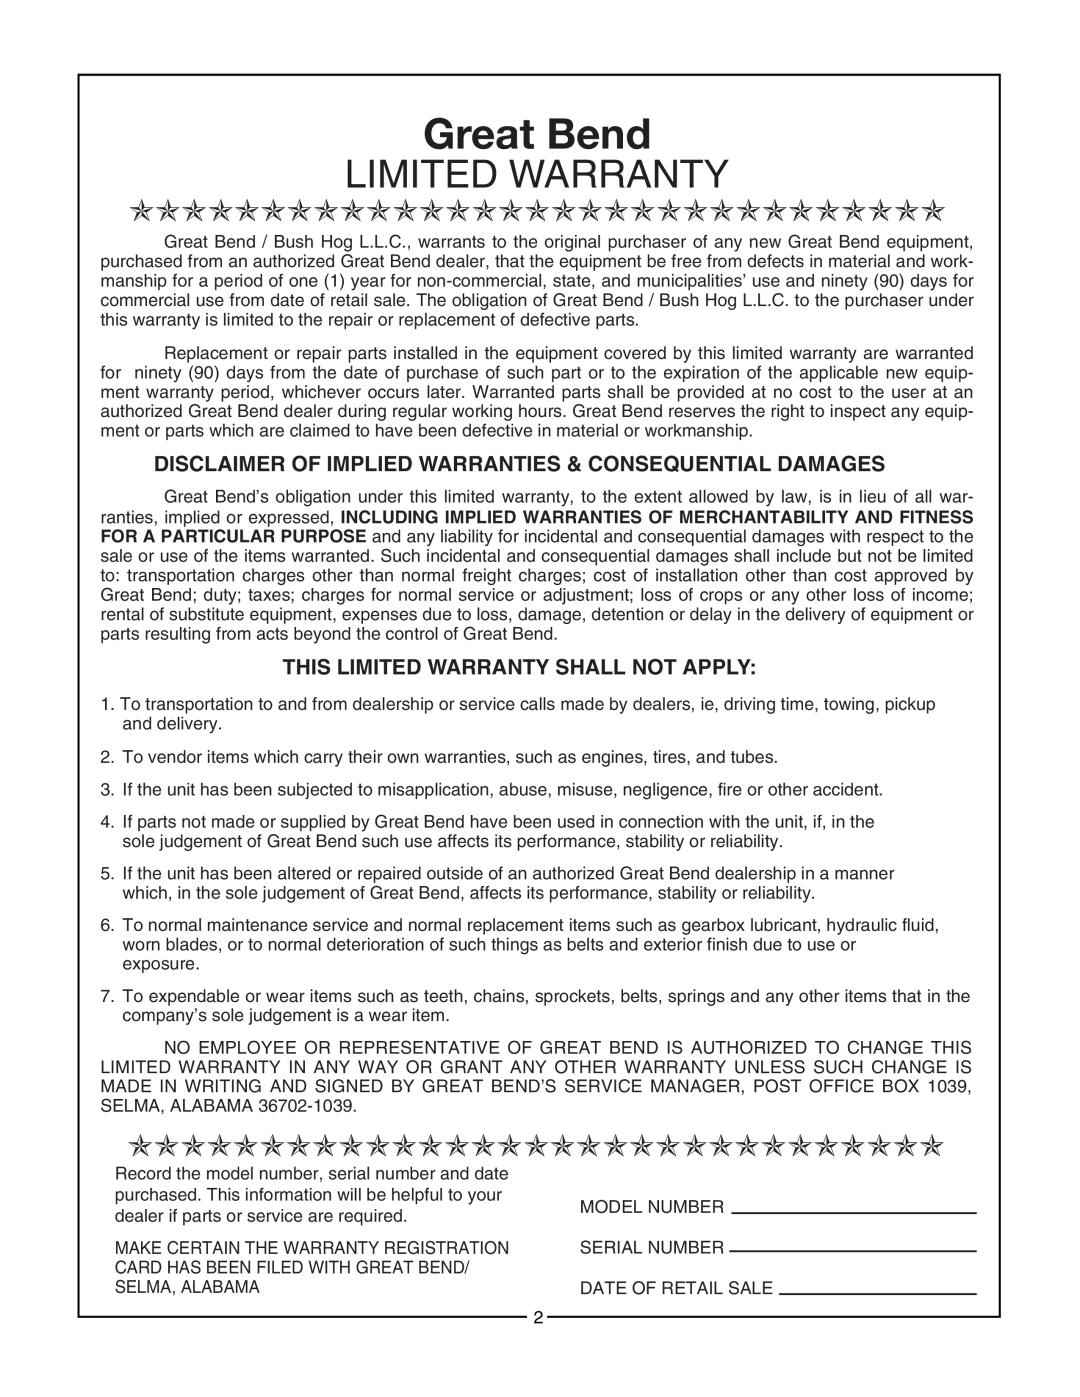 Bush Hog 2165 Disclaimer Of Implied Warranties & Consequential Damages, This Limited Warranty Shall Not Apply, Great Bend 